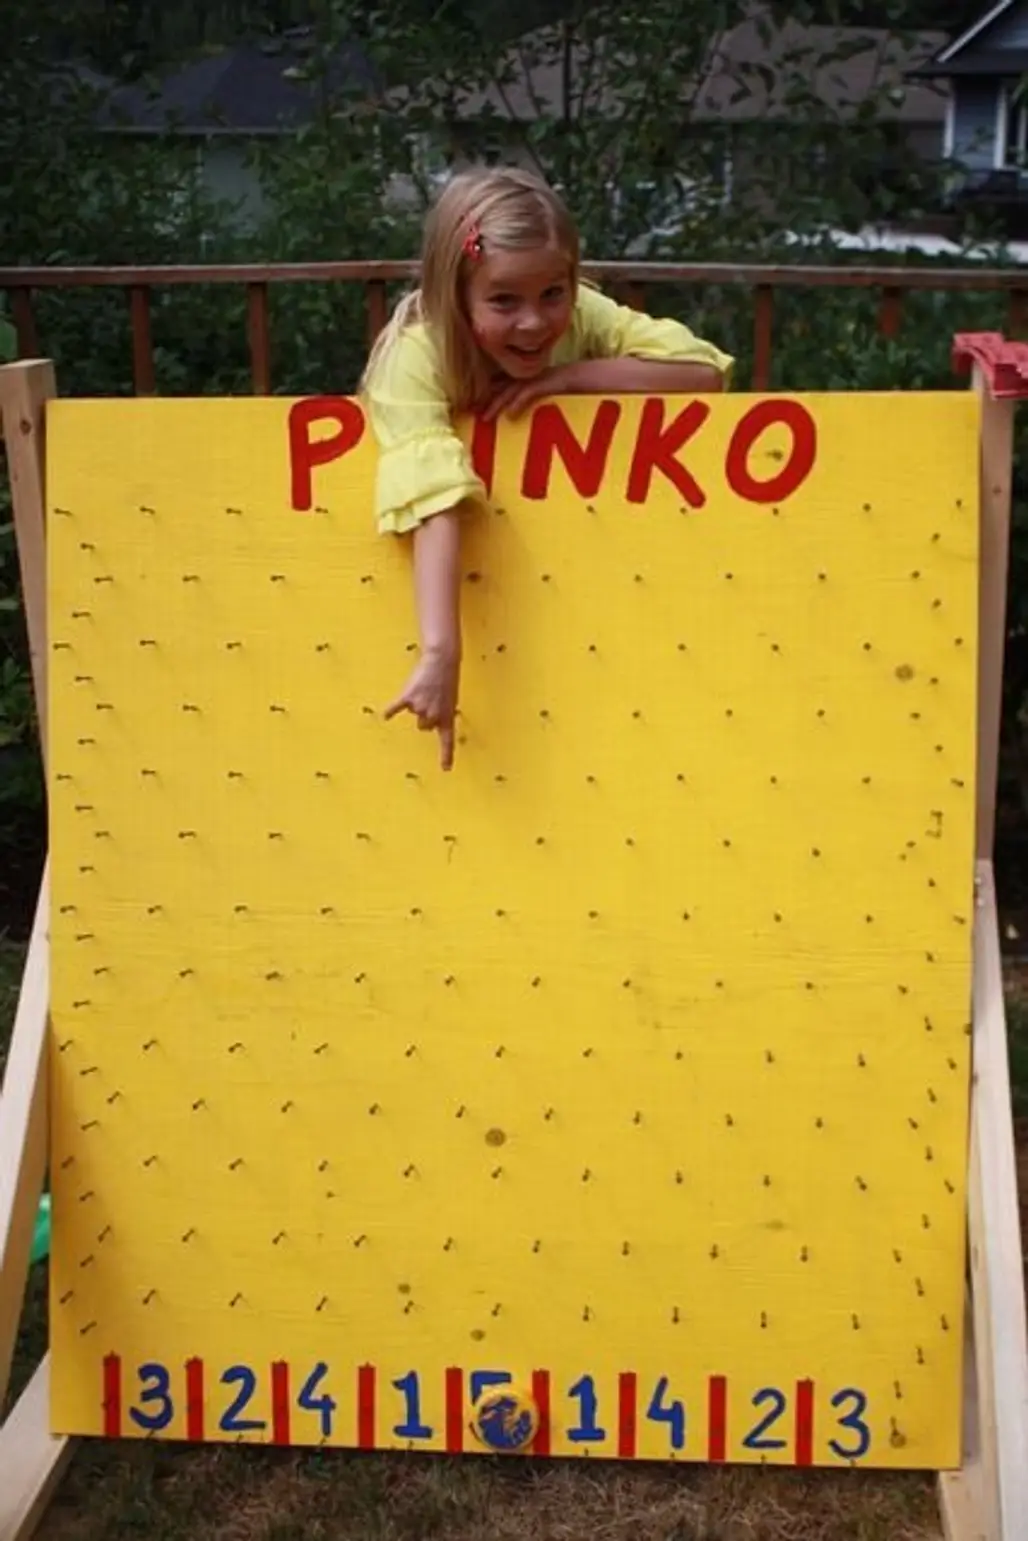 31 DIY Carnival Games for a Rockin' Party